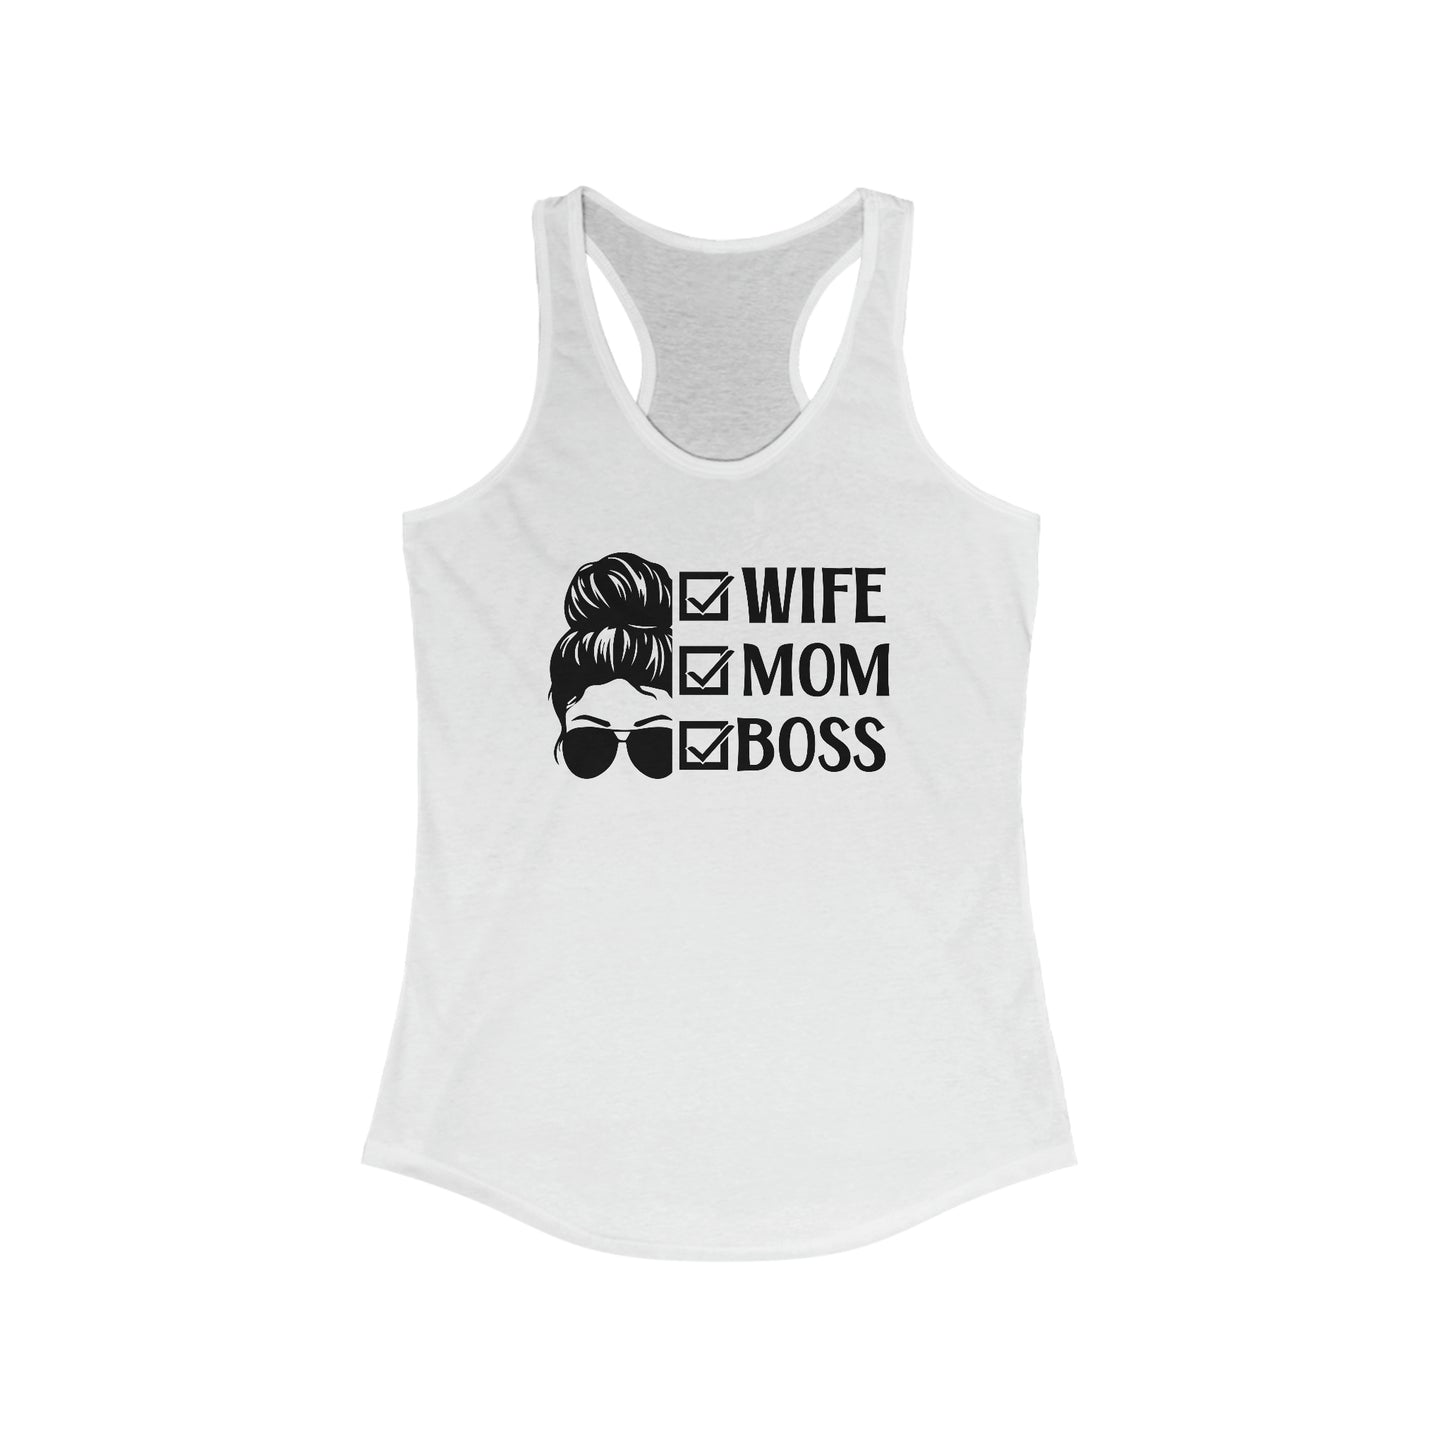 "Wife, Mom, Boss" Women's Tank Top - Weave Got Gifts - Unique Gifts You Won’t Find Anywhere Else!